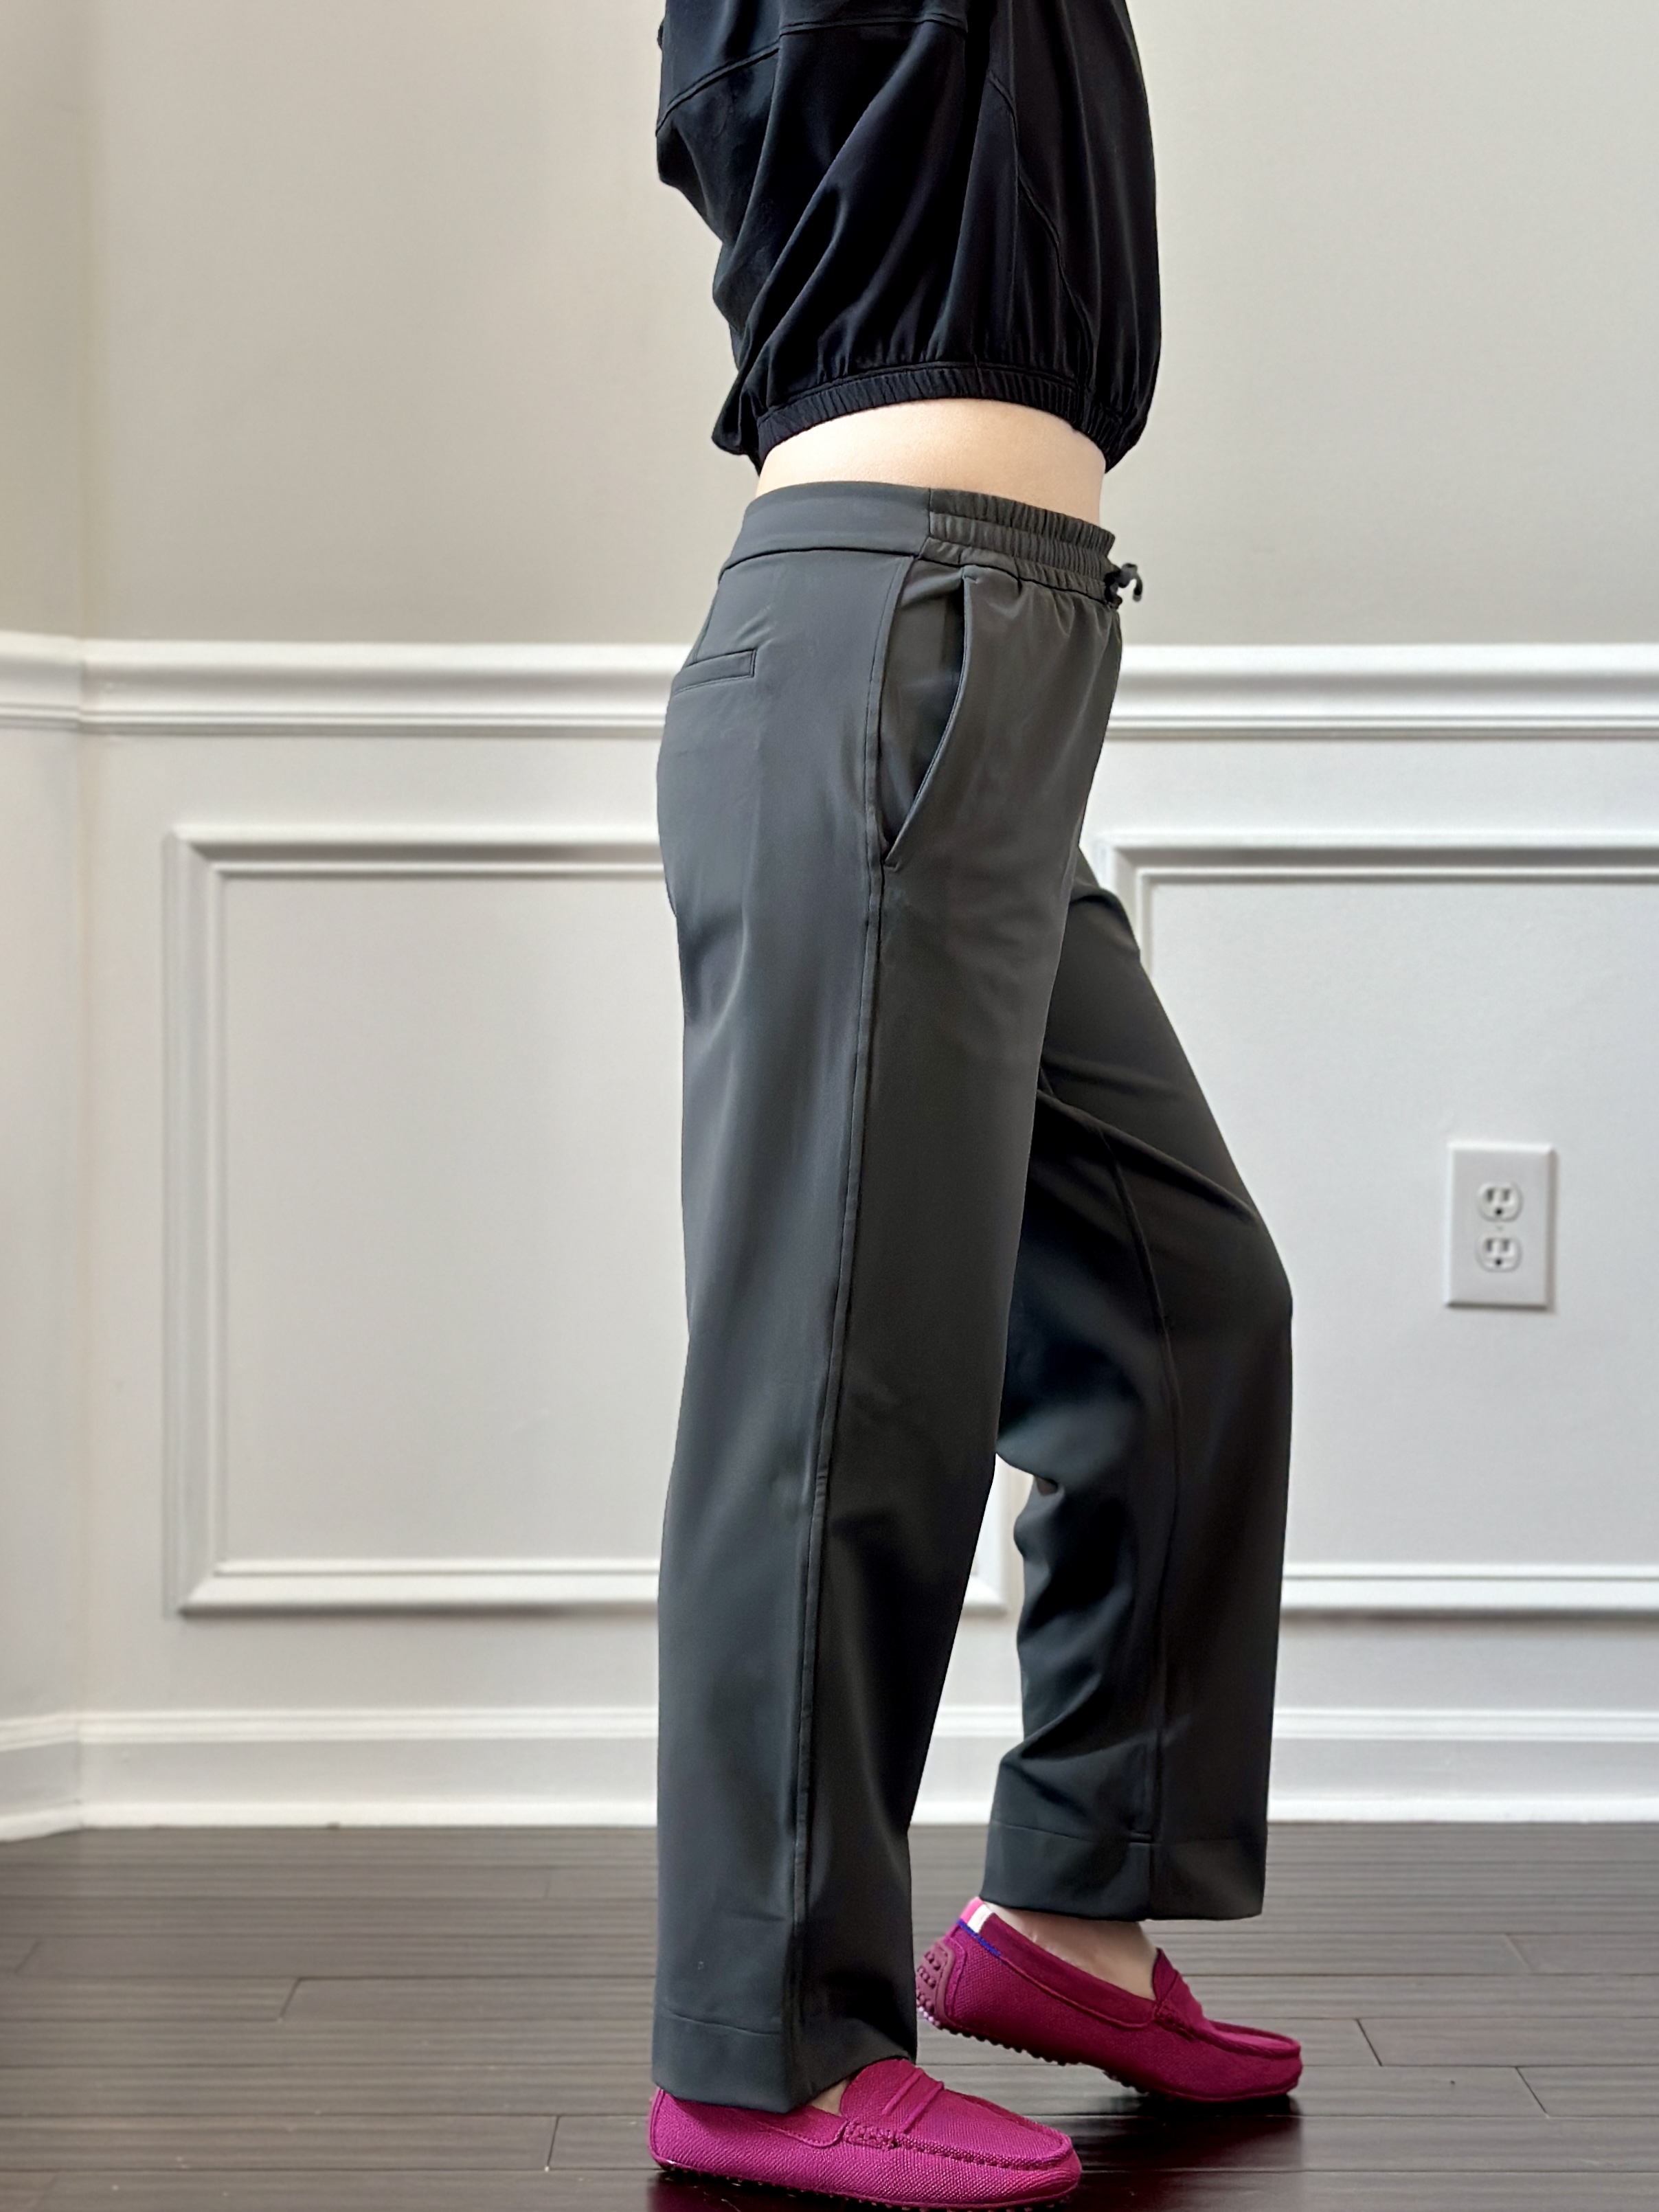 Fit Review! Tapered Leg Mid-Rise Crop 25 inch Luxtreme